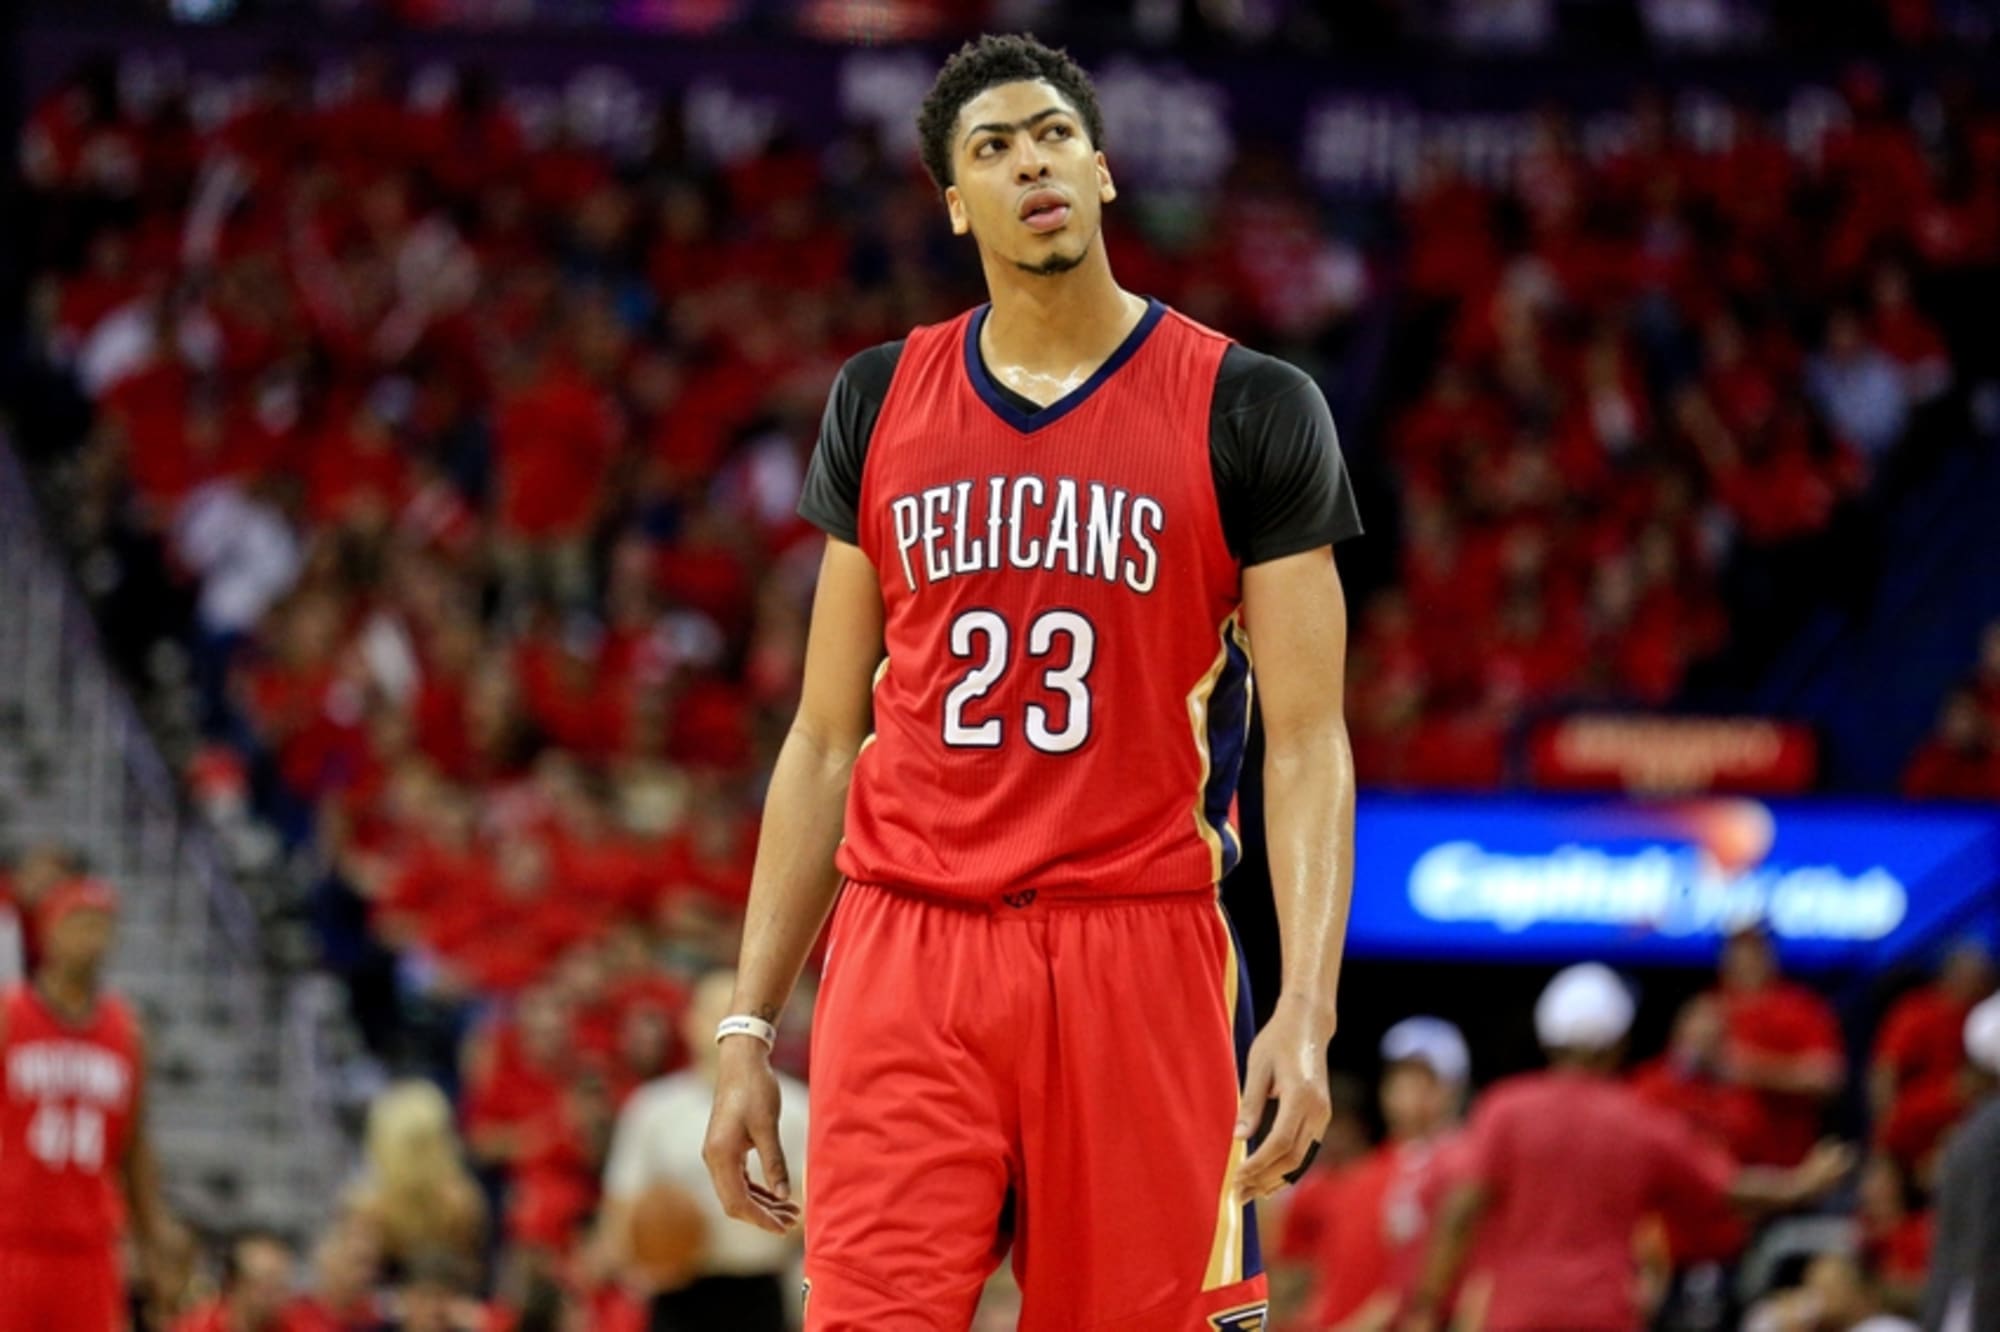 new orleans pelicans jersey 2015